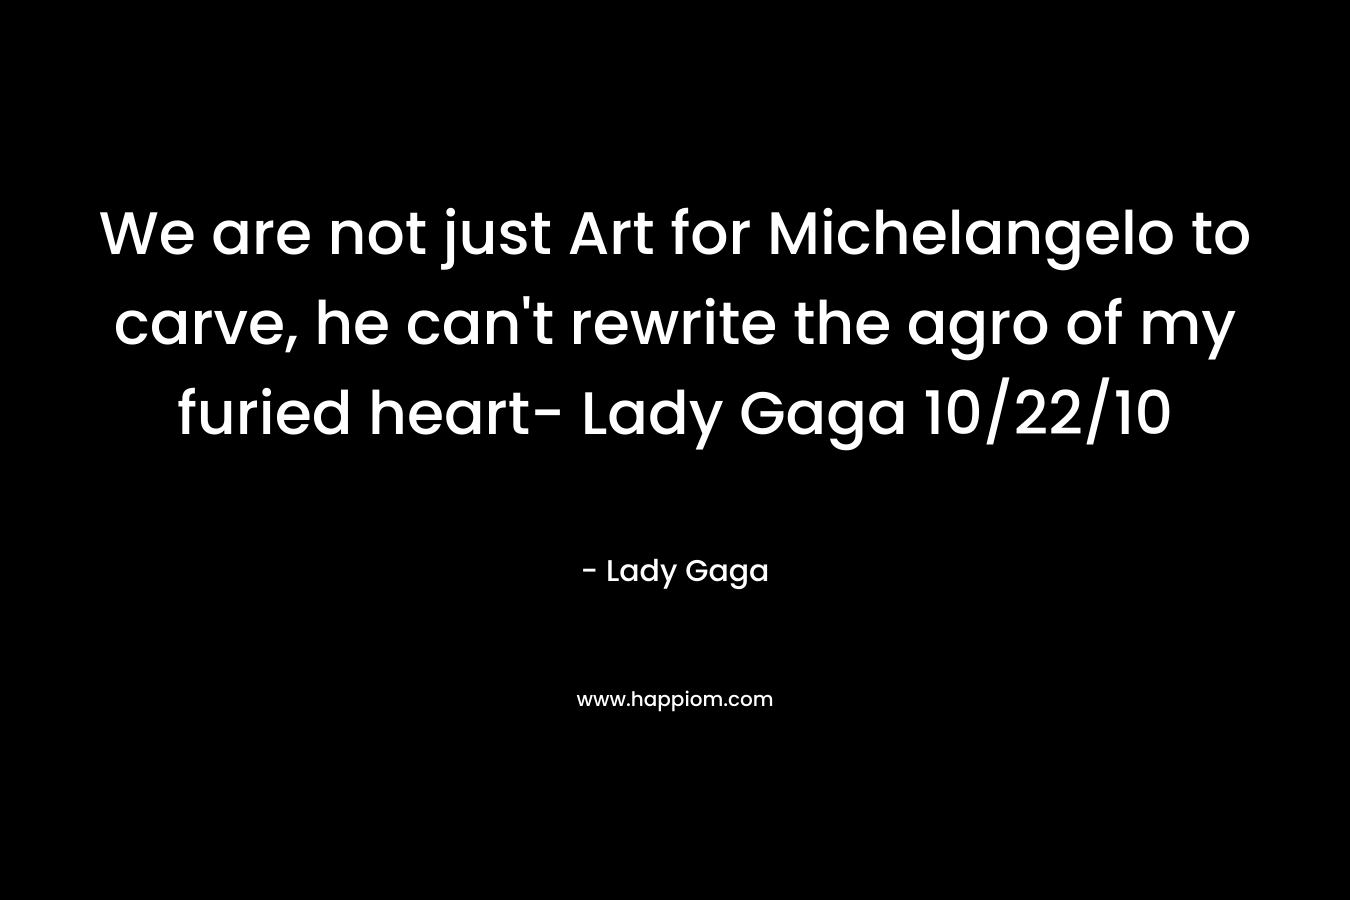 We are not just Art for Michelangelo to carve, he can’t rewrite the agro of my furied heart- Lady Gaga 10/22/10 – Lady Gaga